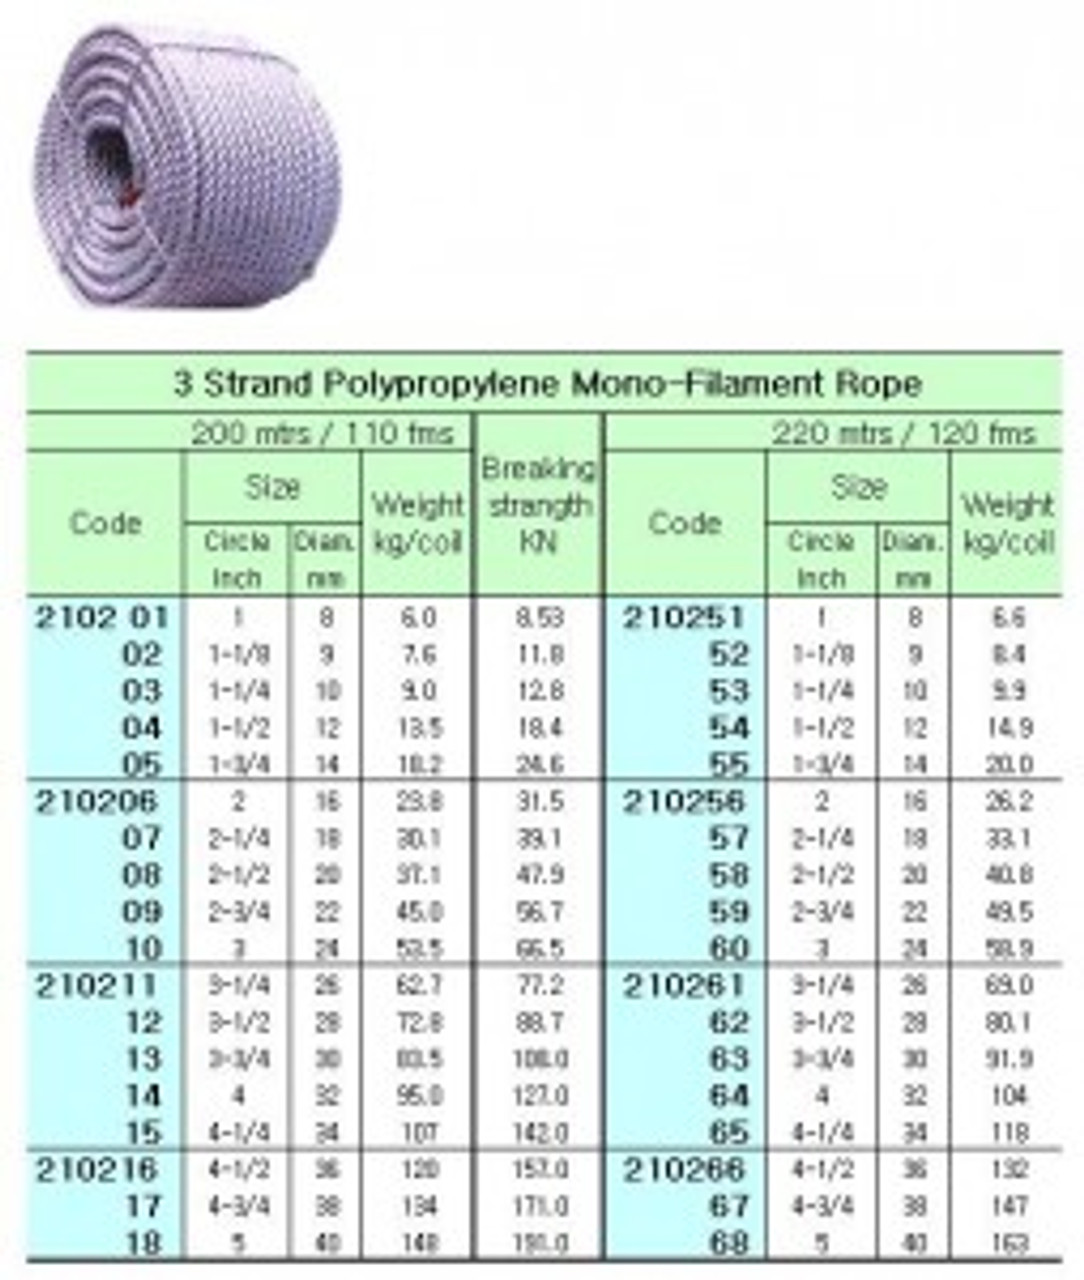 IMPA 210211 POLYPROPYLENE ROPE 26mm 3-strand coil of 220 mtr.